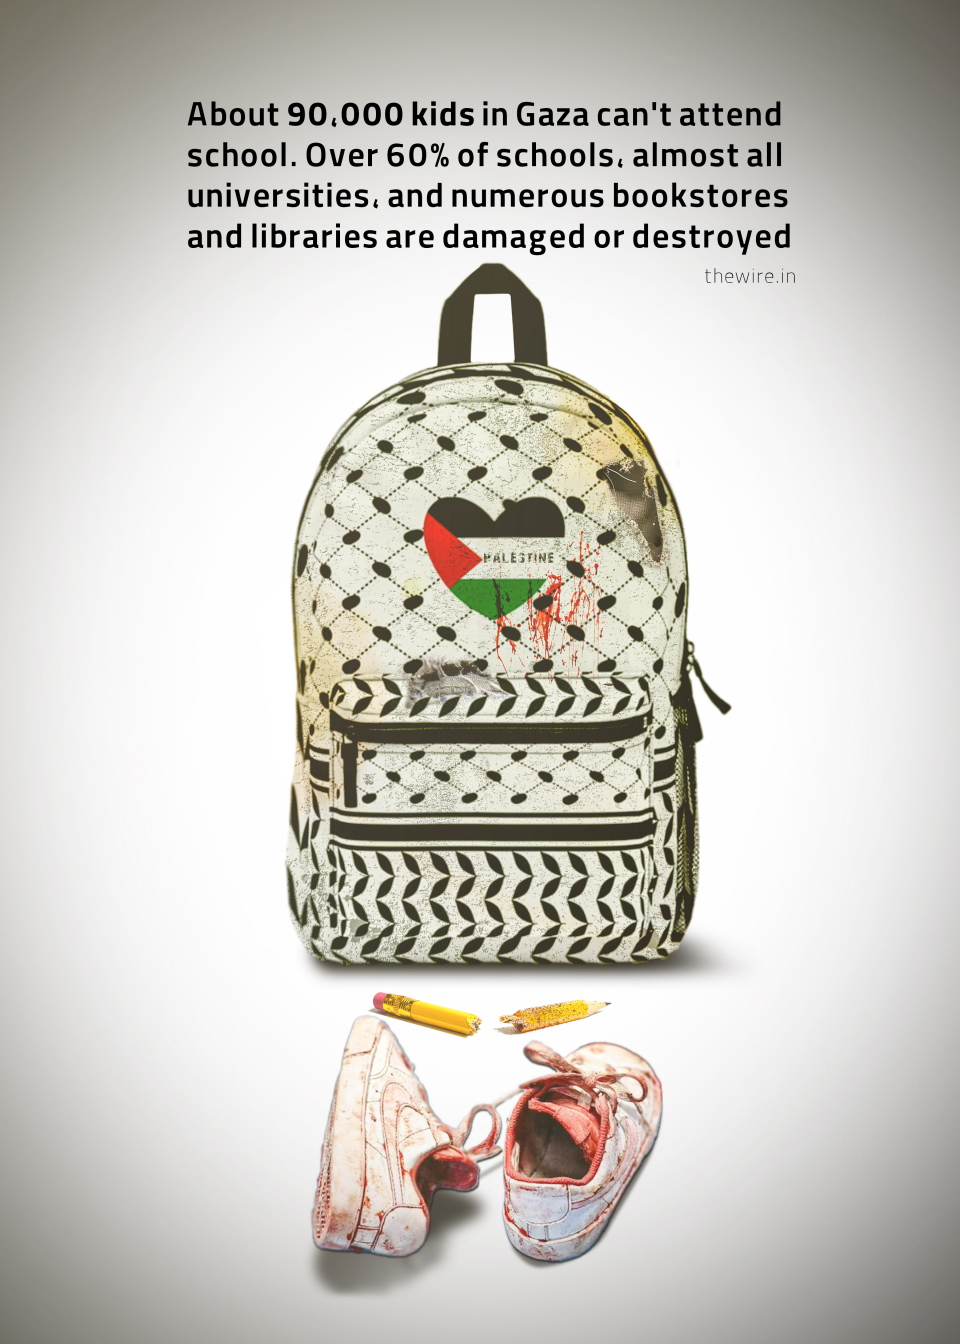 Israeli Regime's Attack on Gaza Forces Closure of Schools, Denying Education and Knowledge